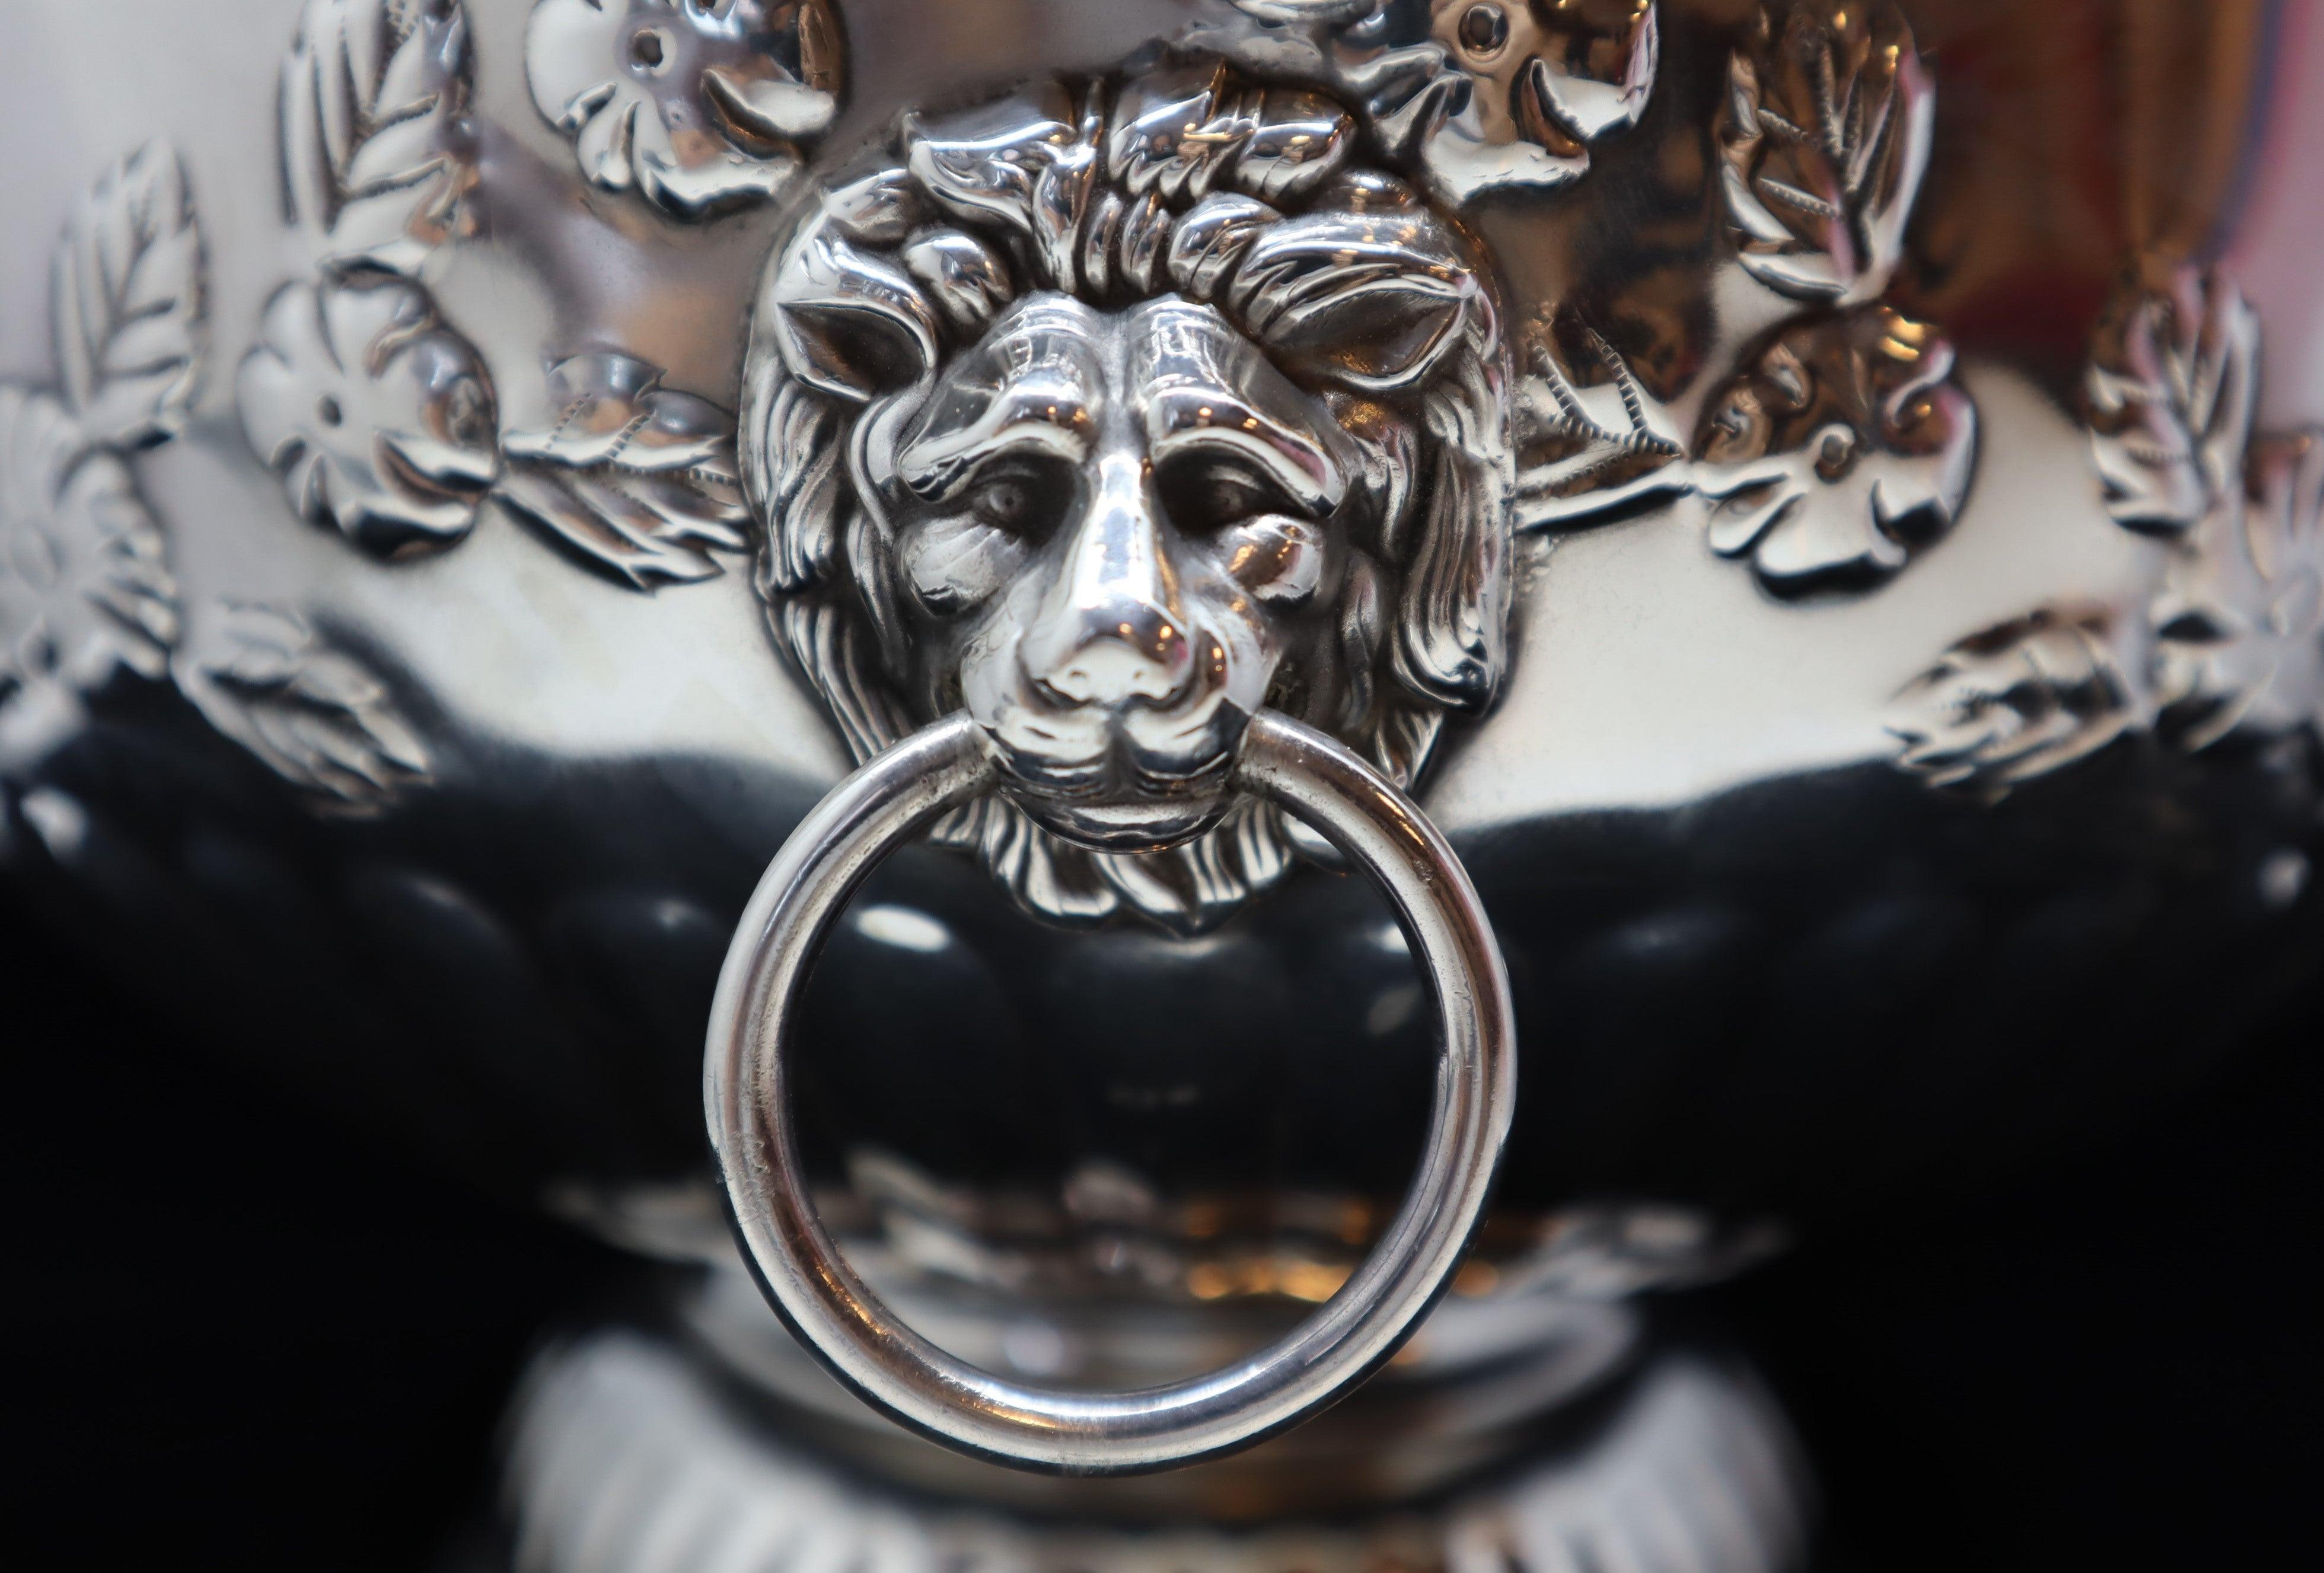 A Sheffield made mid-20th century silver plated punch bowl with lion heads serving as handles.
The silver plate on a copper base.
Hallmarked on the bottom of the base for “Silver on Copper”, Sheffield.
This punch bowl makes a very attractive